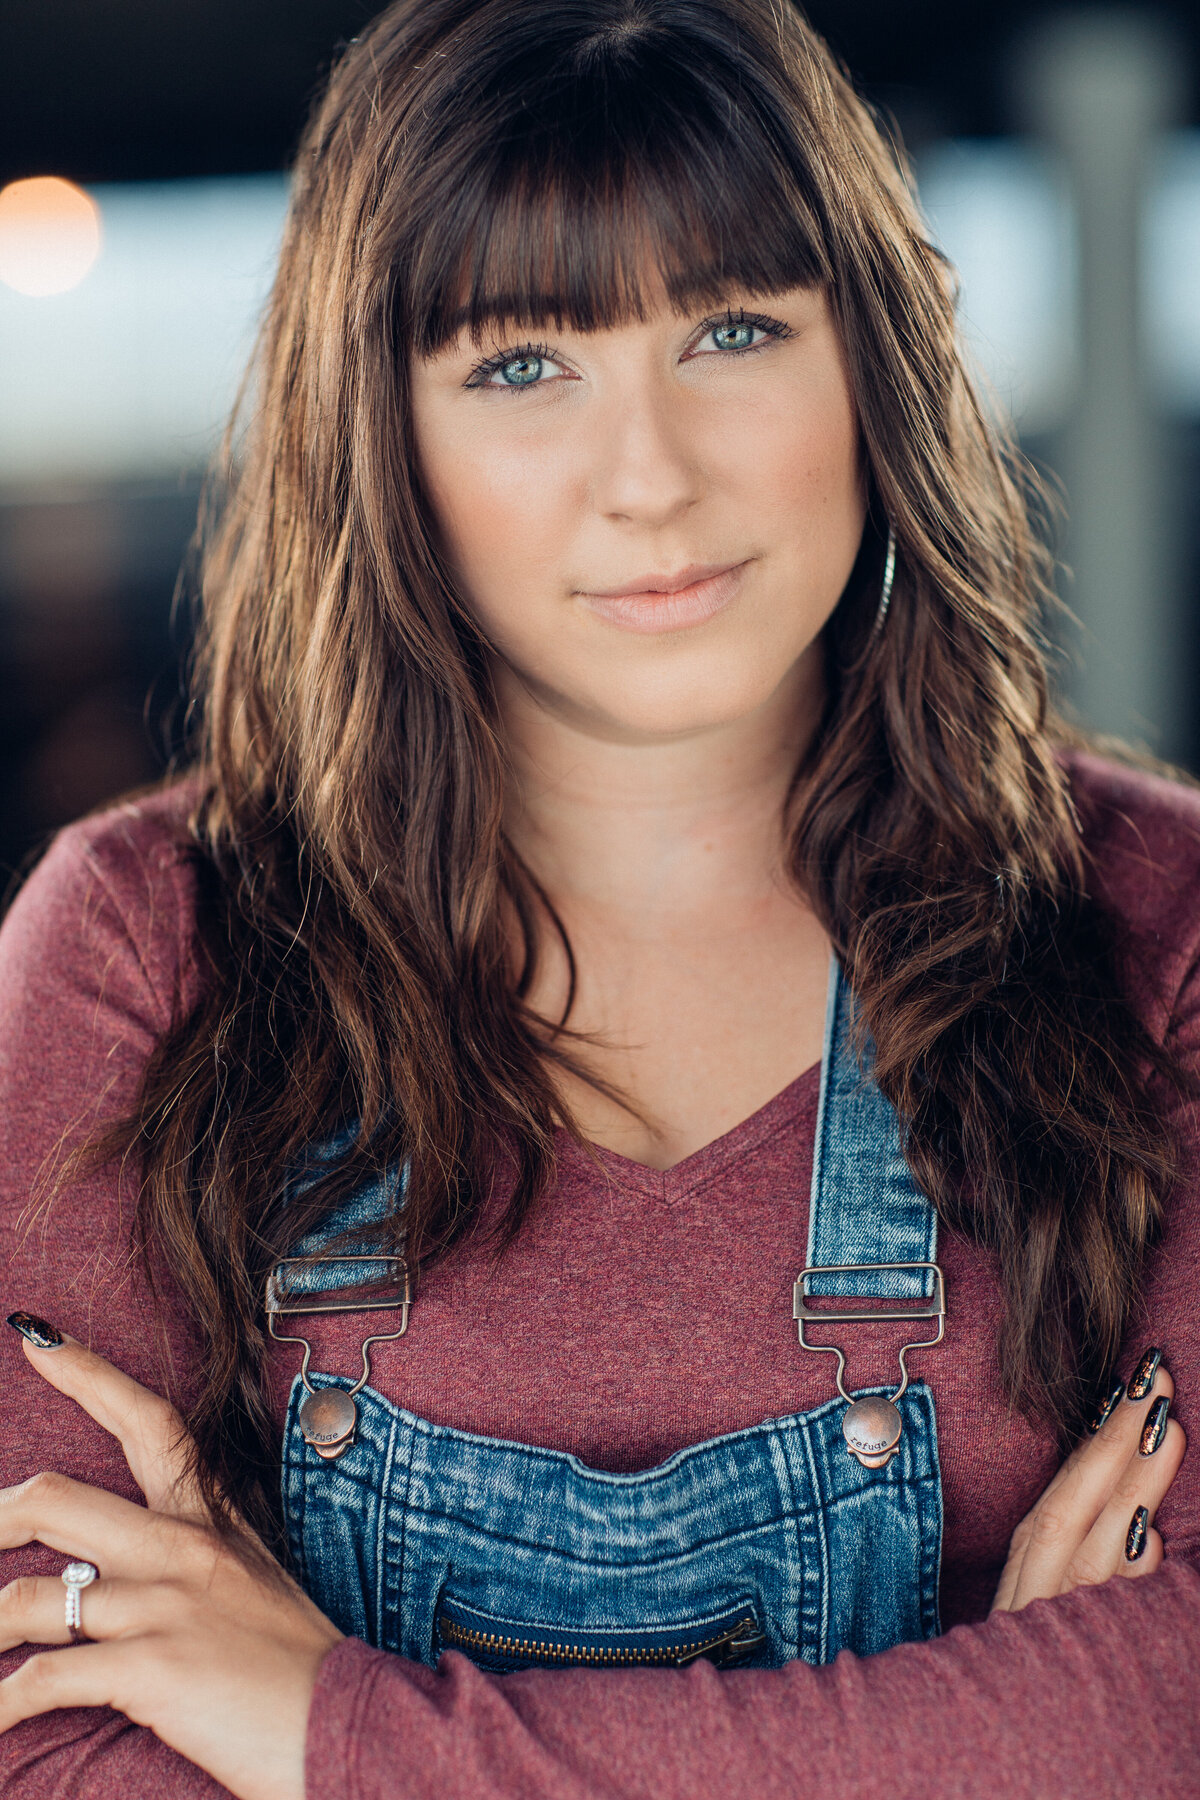 Headshot Photograph Of Young Woman In Denim Jumper And Maroon Sweater Los Angeles